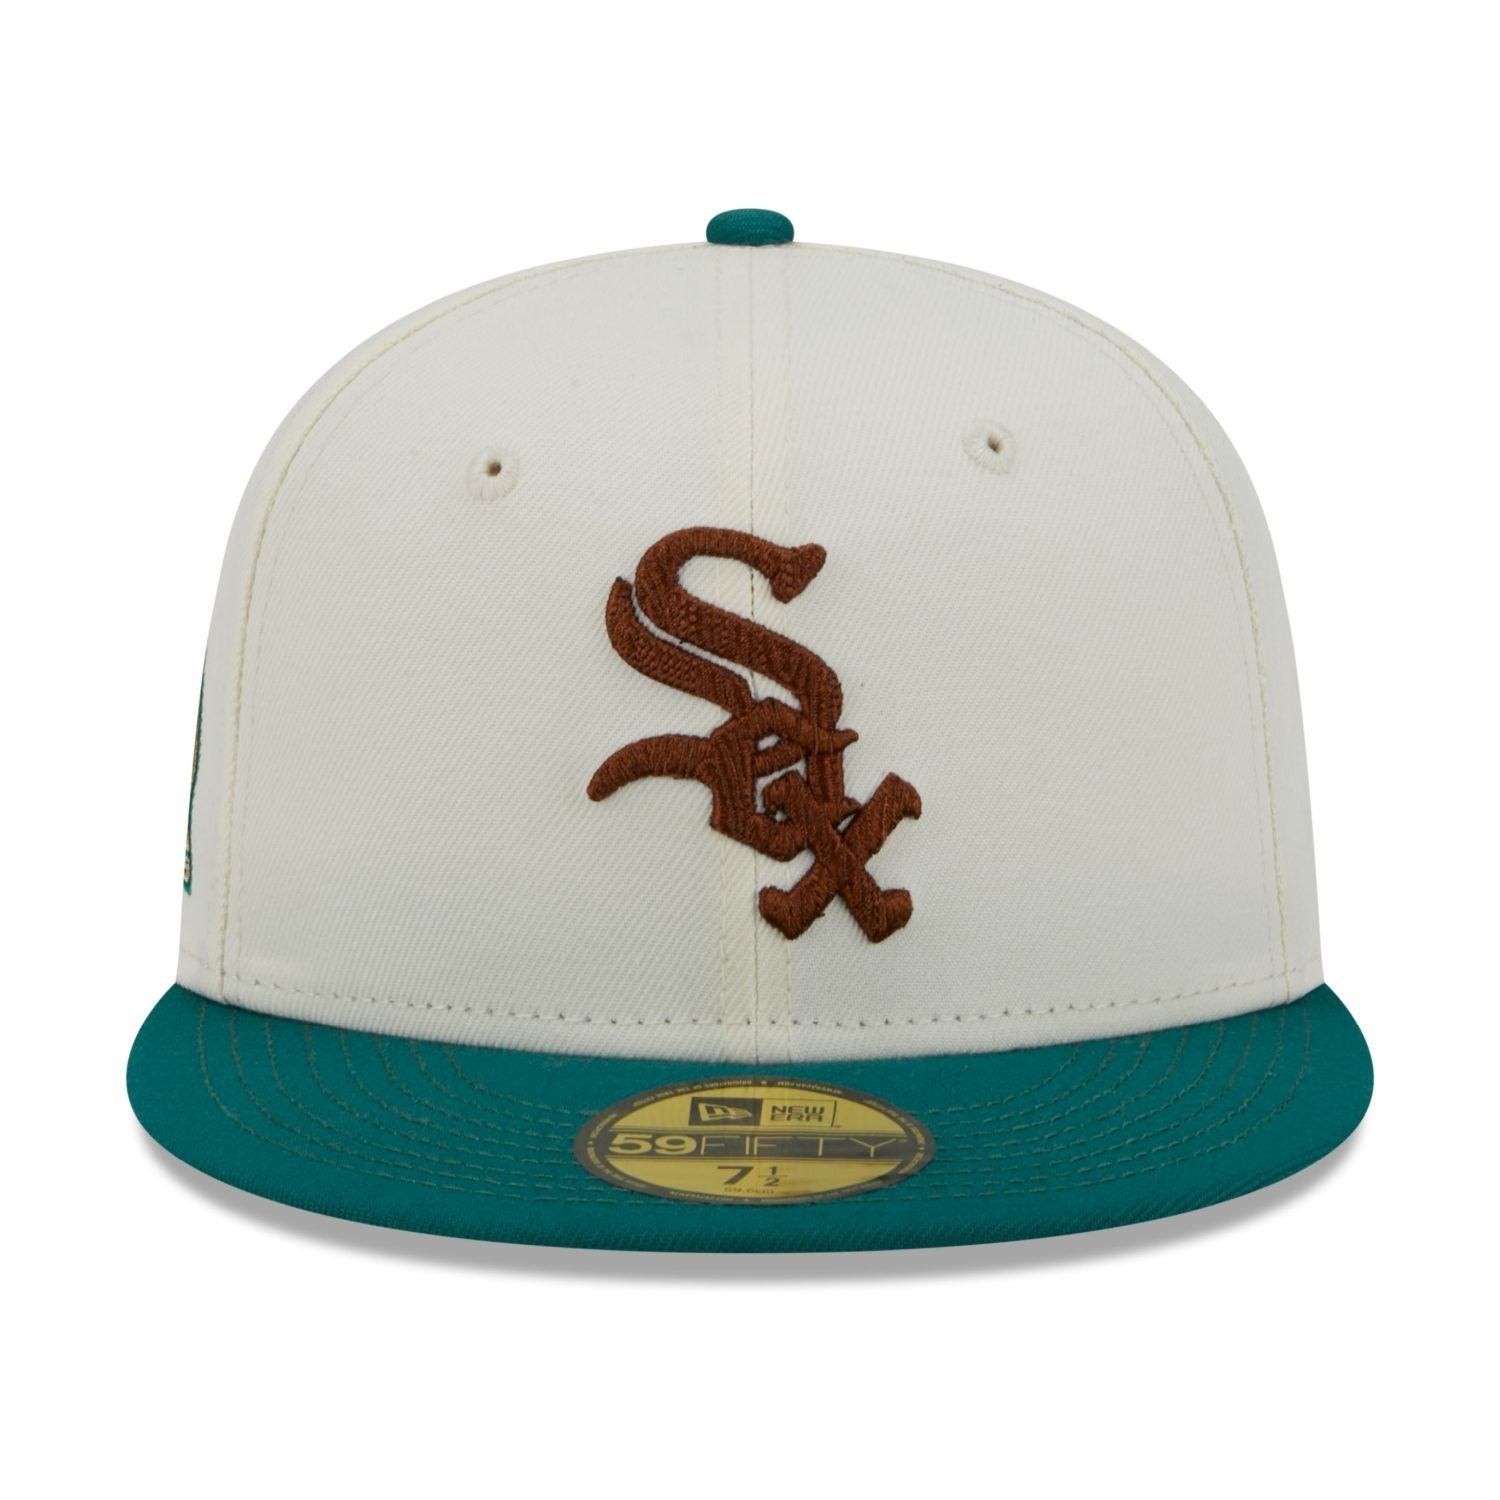 New Era Fitted White Cap Chicago Sox CAMP 59Fifty